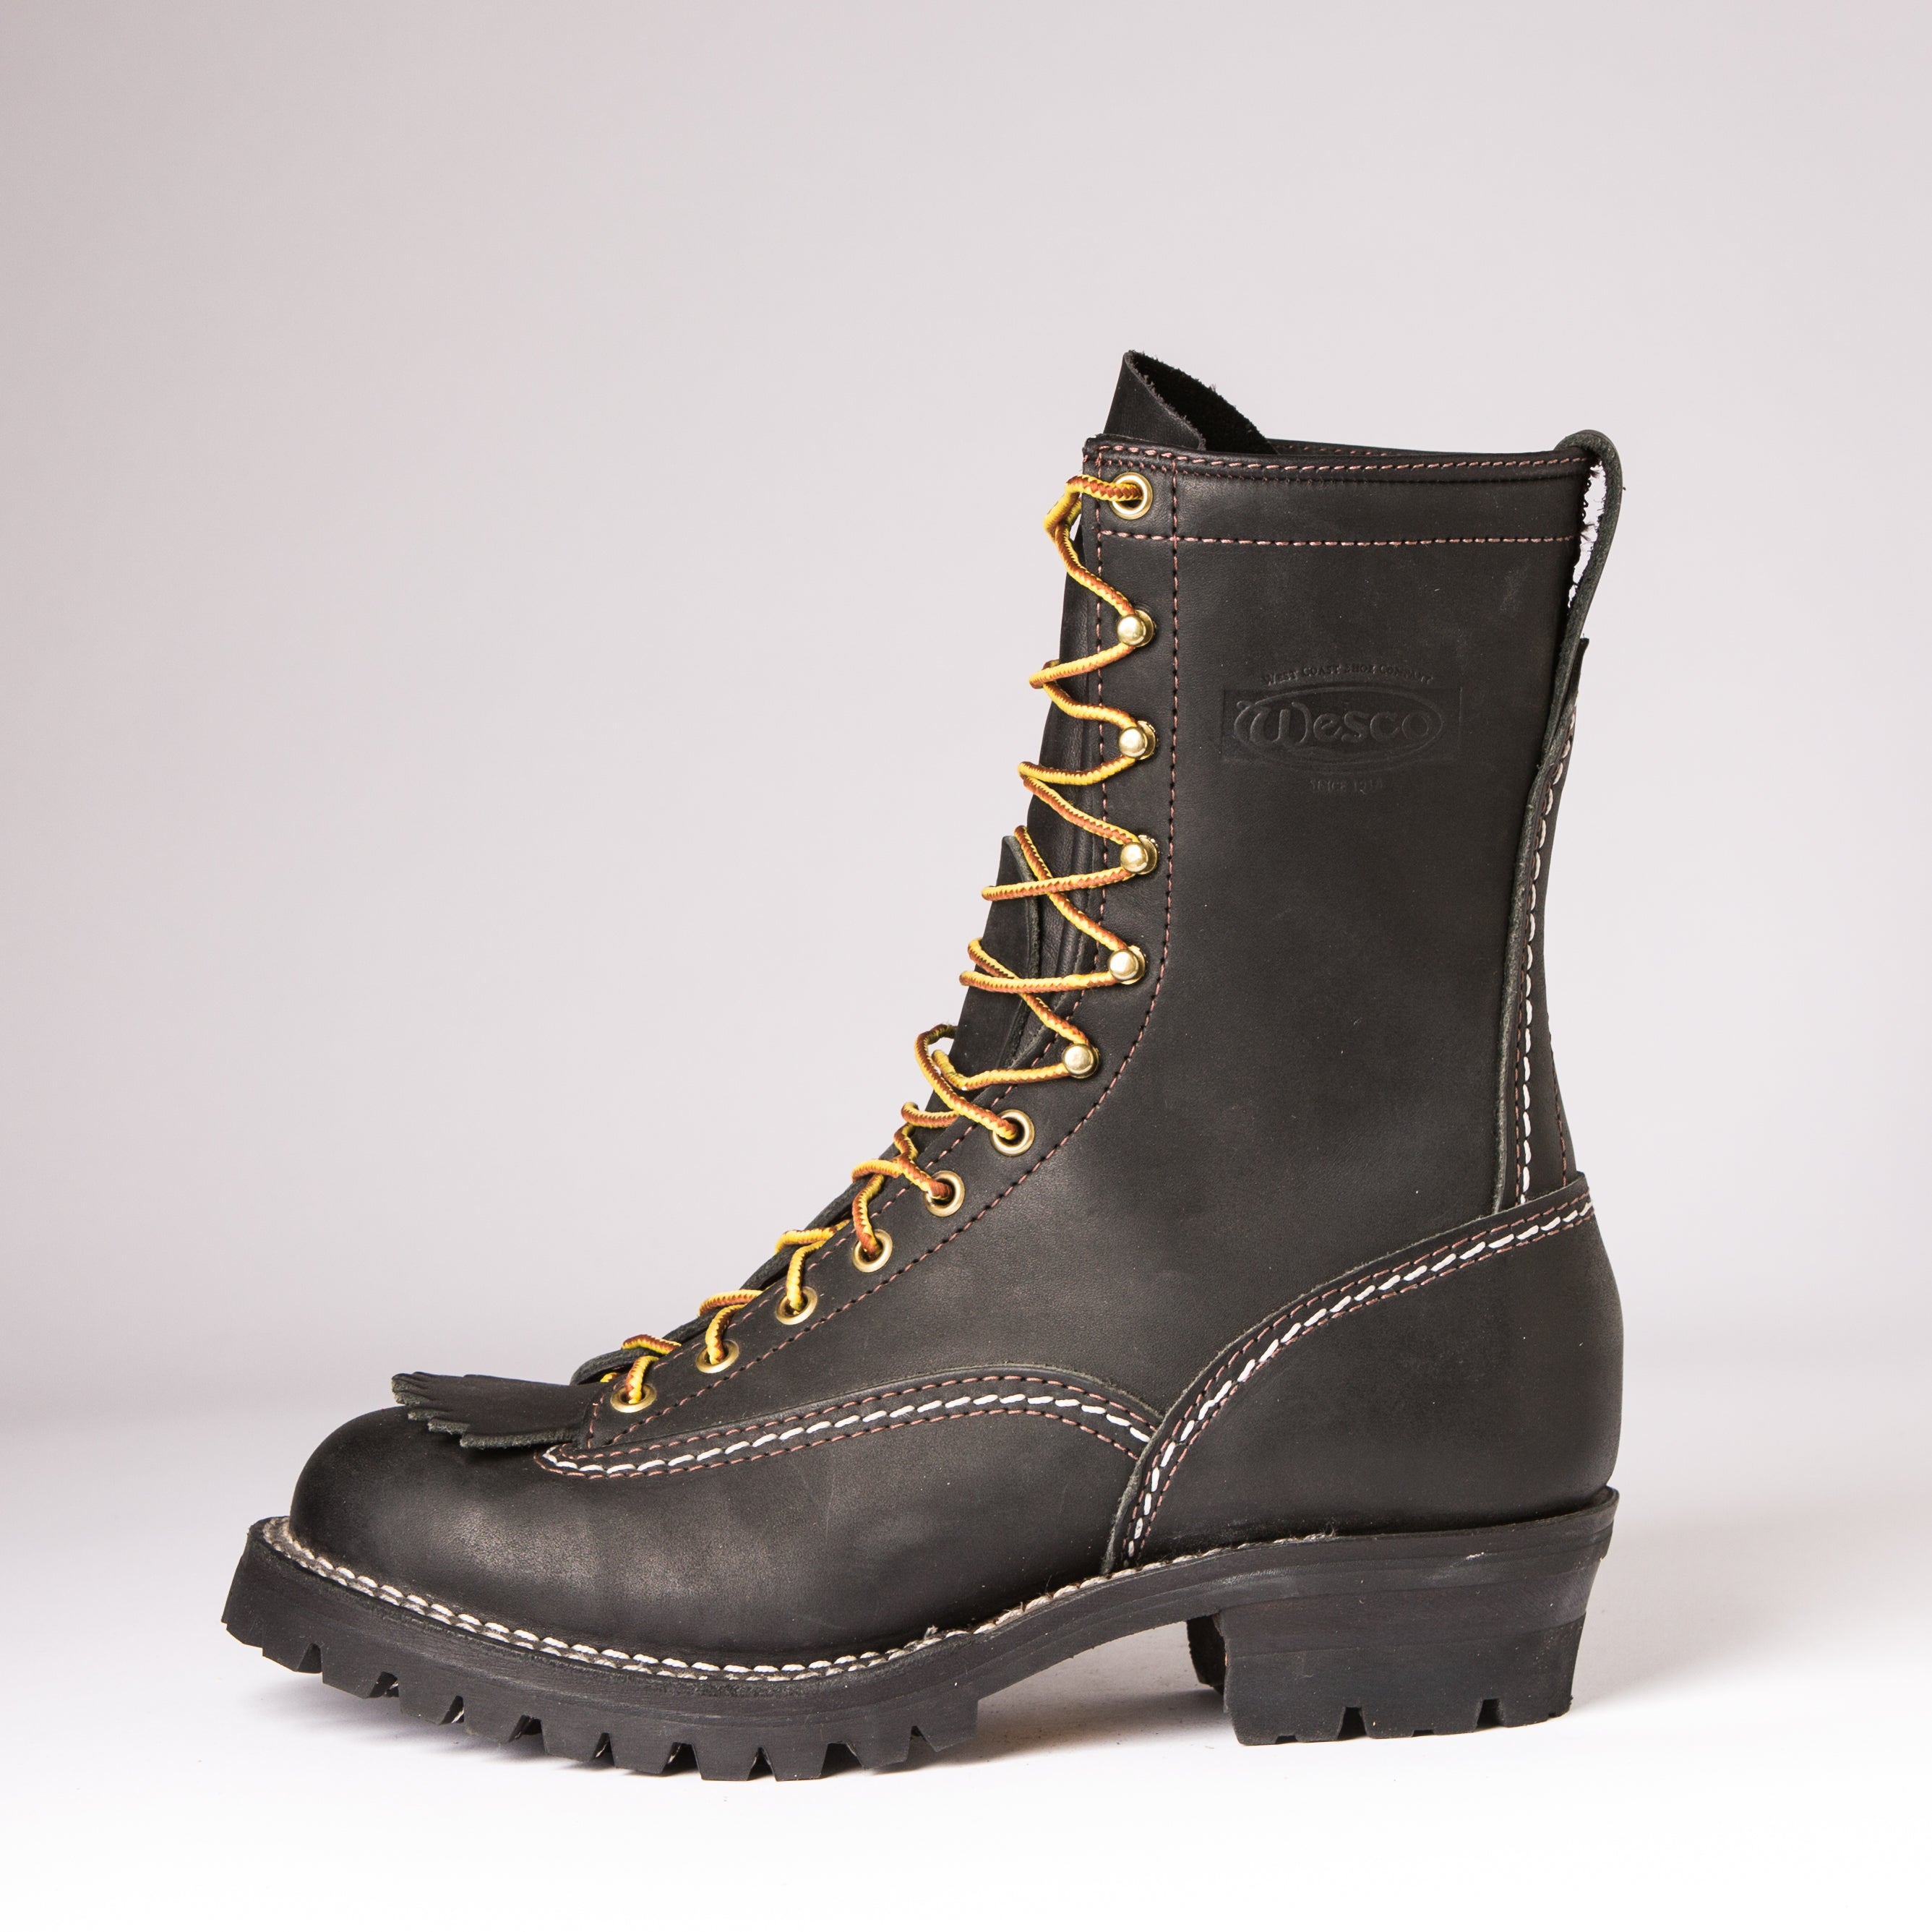 Wesco Jobmaster - Carter's Boots and Repair